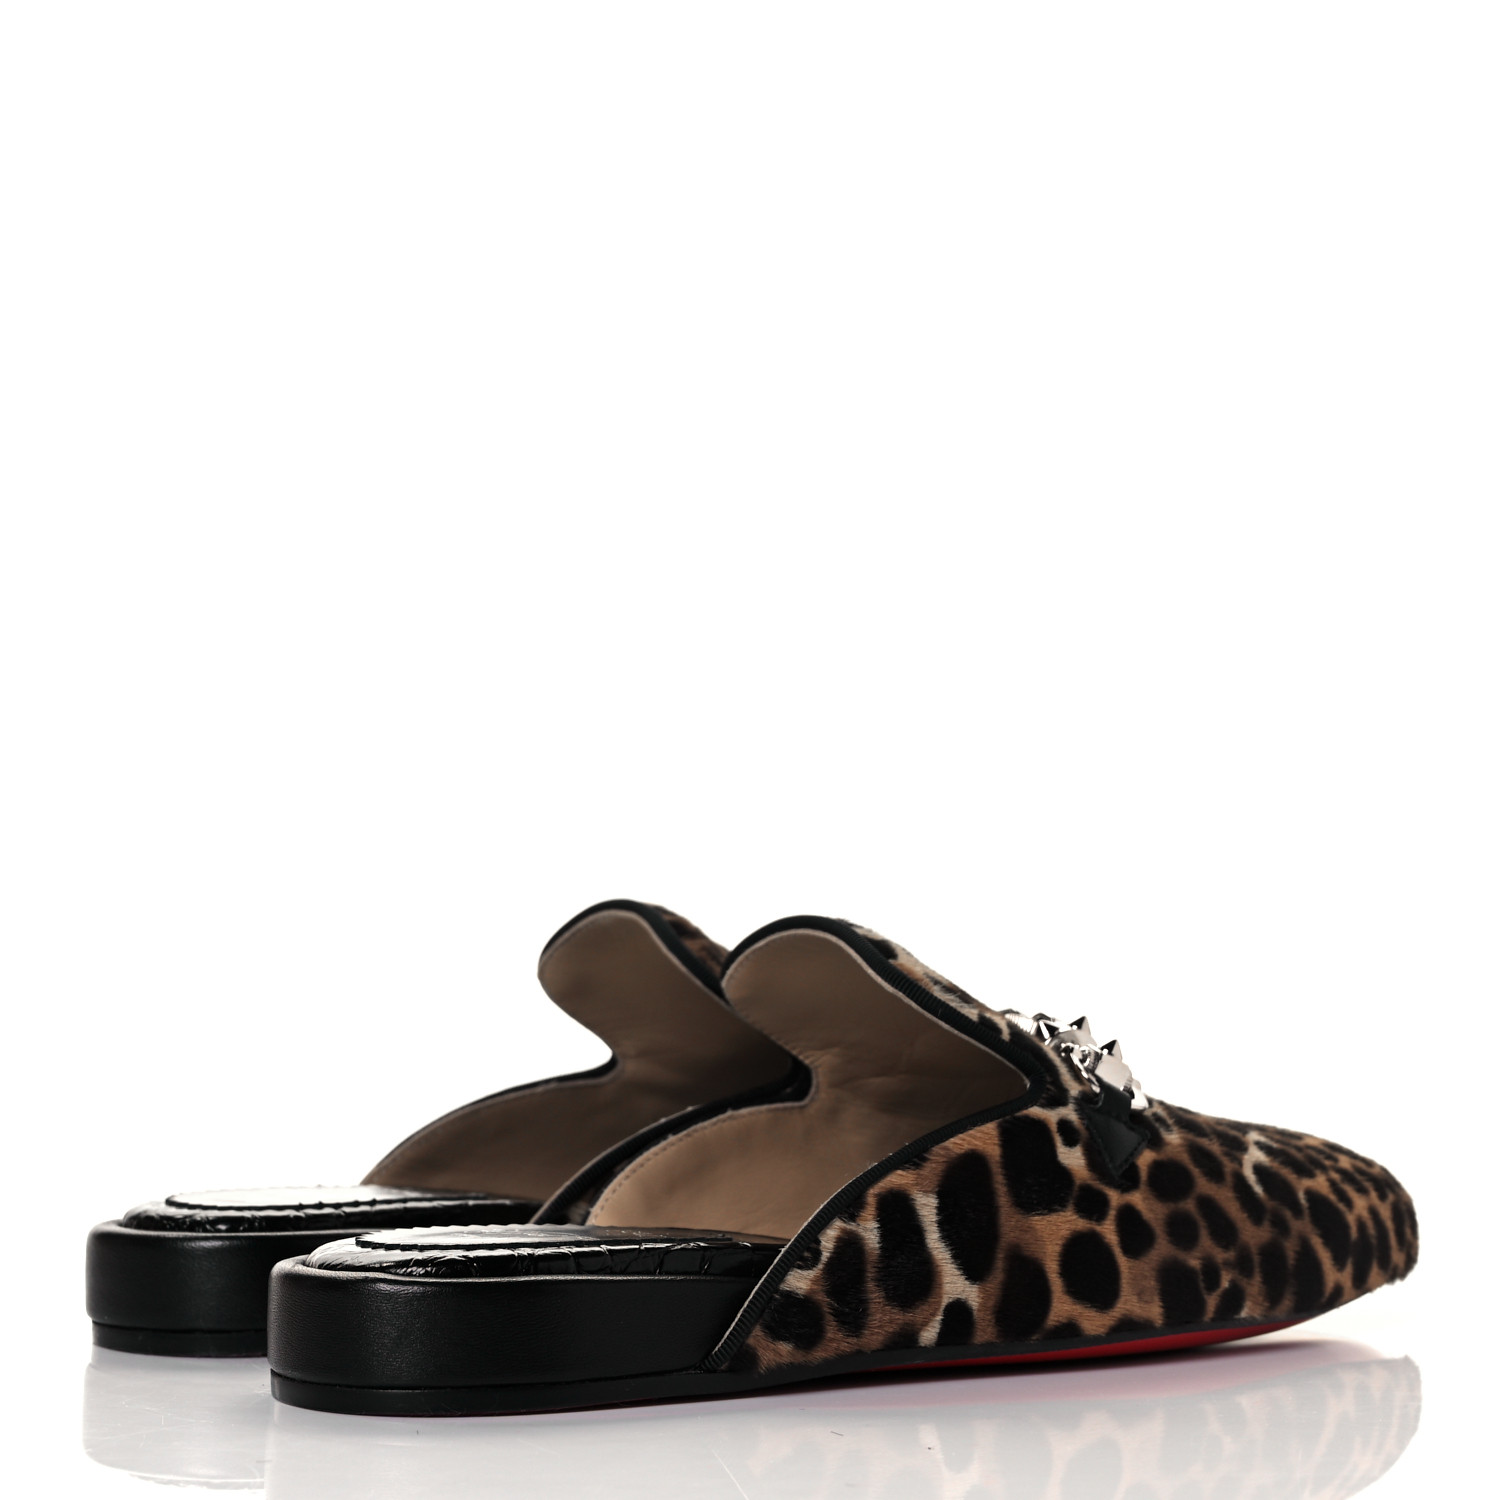 CHRISTIAN LOUBOUTIN Pony Hair Coolito Swing Donna Flat 38 Brown 